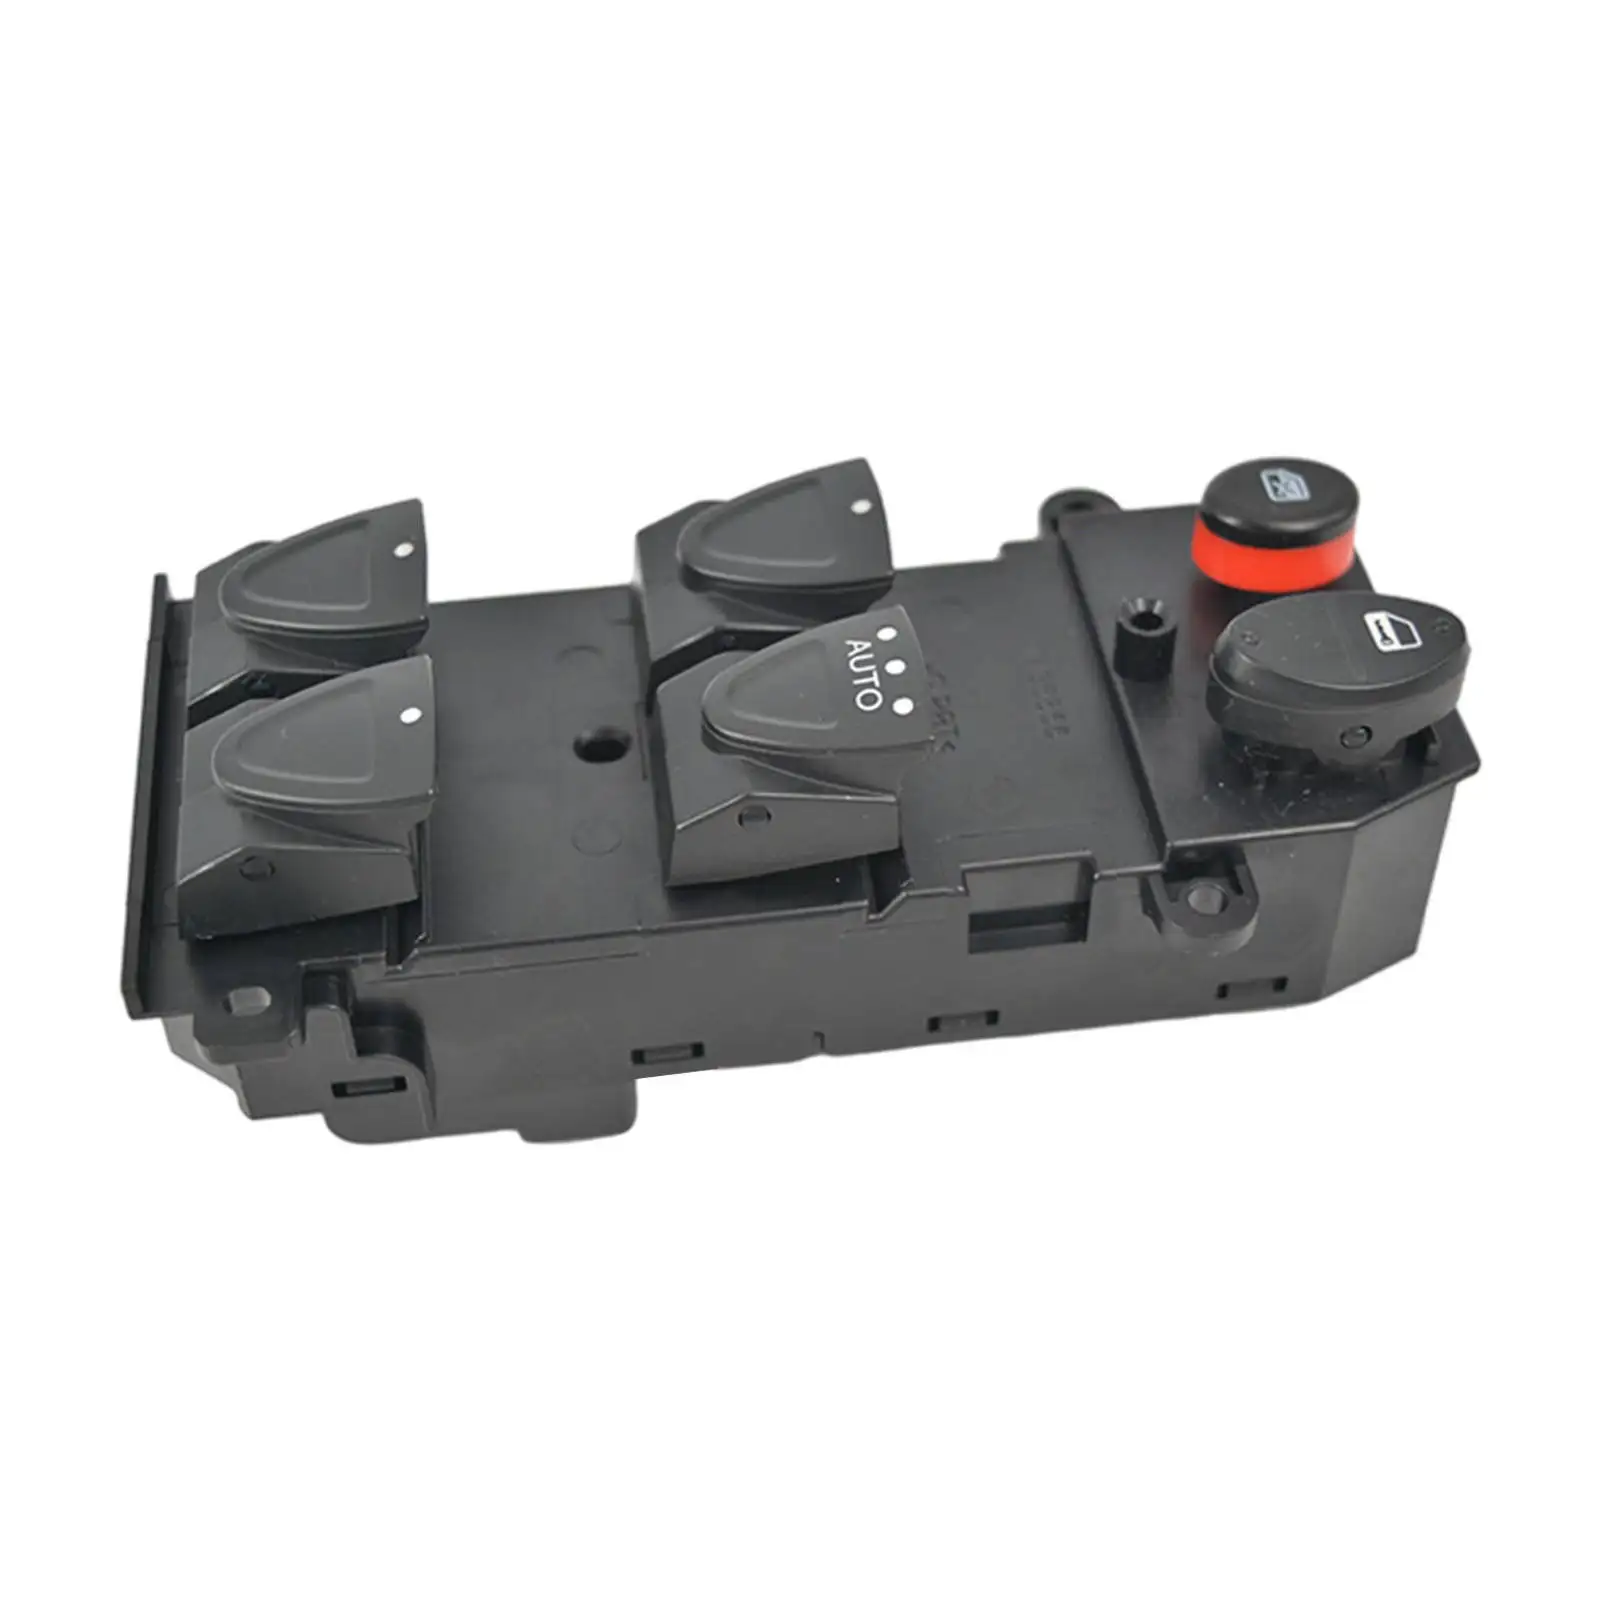 Window Master Switch 35750-Snb-Rhd Replaces Spare Parts Professional for Honda Civic Assy Durable Premium Easy to Install